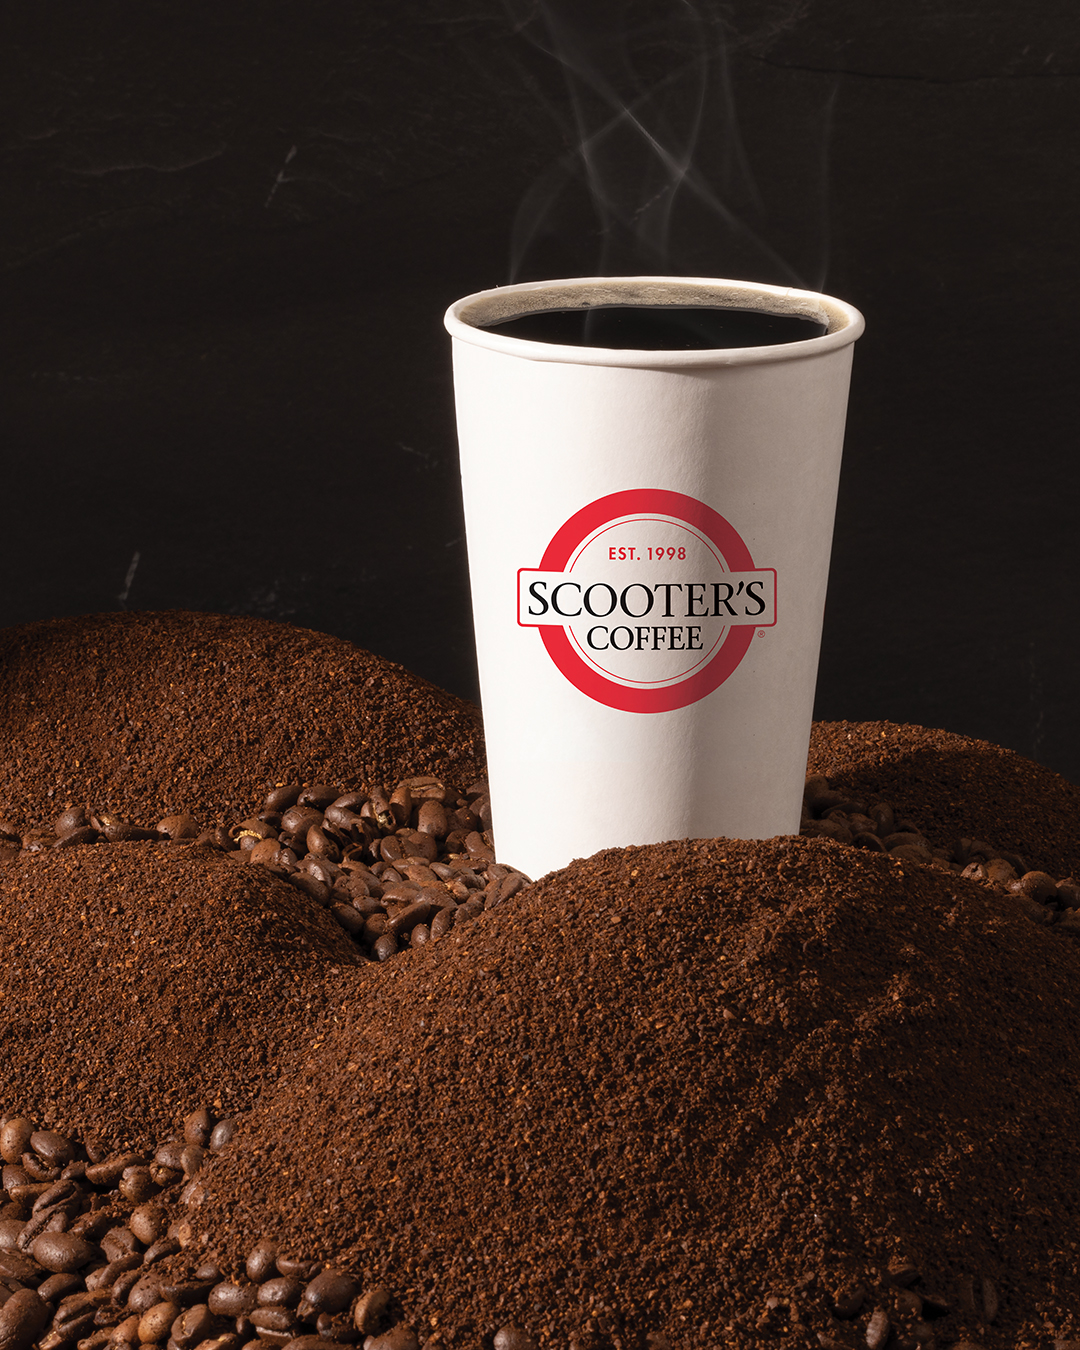 September is Scooter’s Coffee Month!